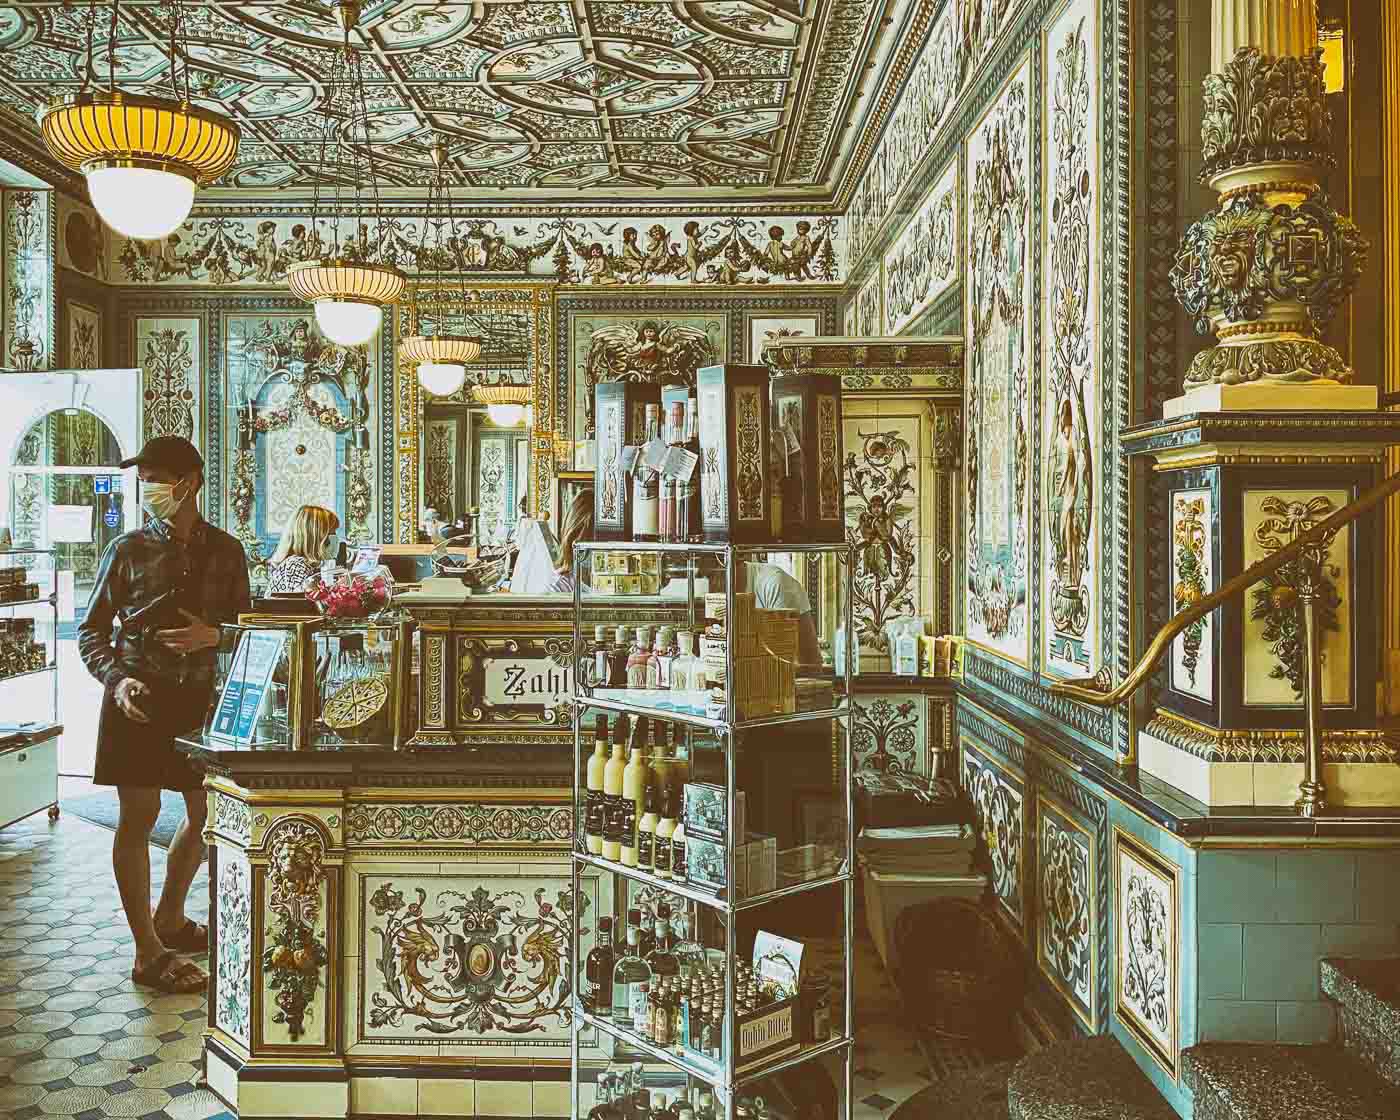 If you're looking for an unforgettable experience in Dresden, Germany, look no further than Pfunds Molkerei, the world's most beautiful milk shop. Located in the heart of the Dresden Neustadt, Pfunds Molkerei is a must-see destination for anyone interested in art, architecture, and dairy products.